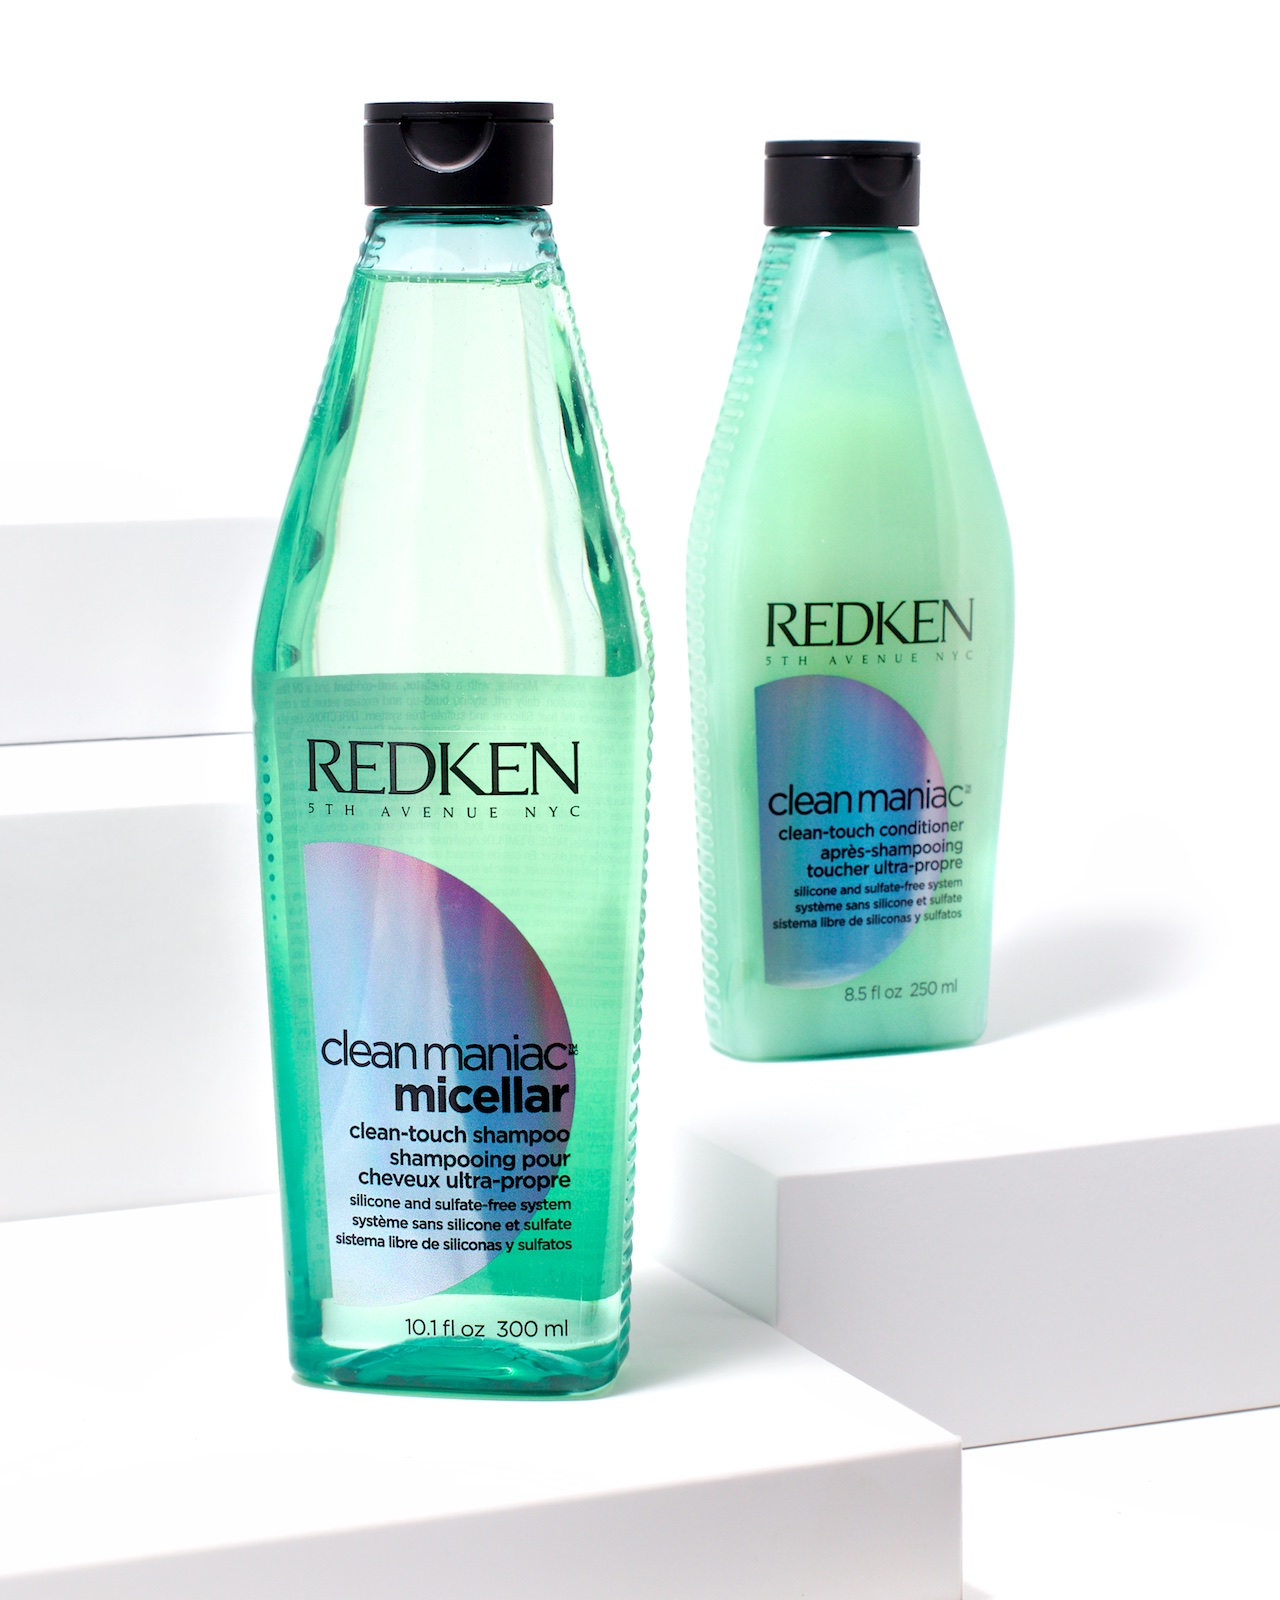 All about: the Redken Clean Maniac collection